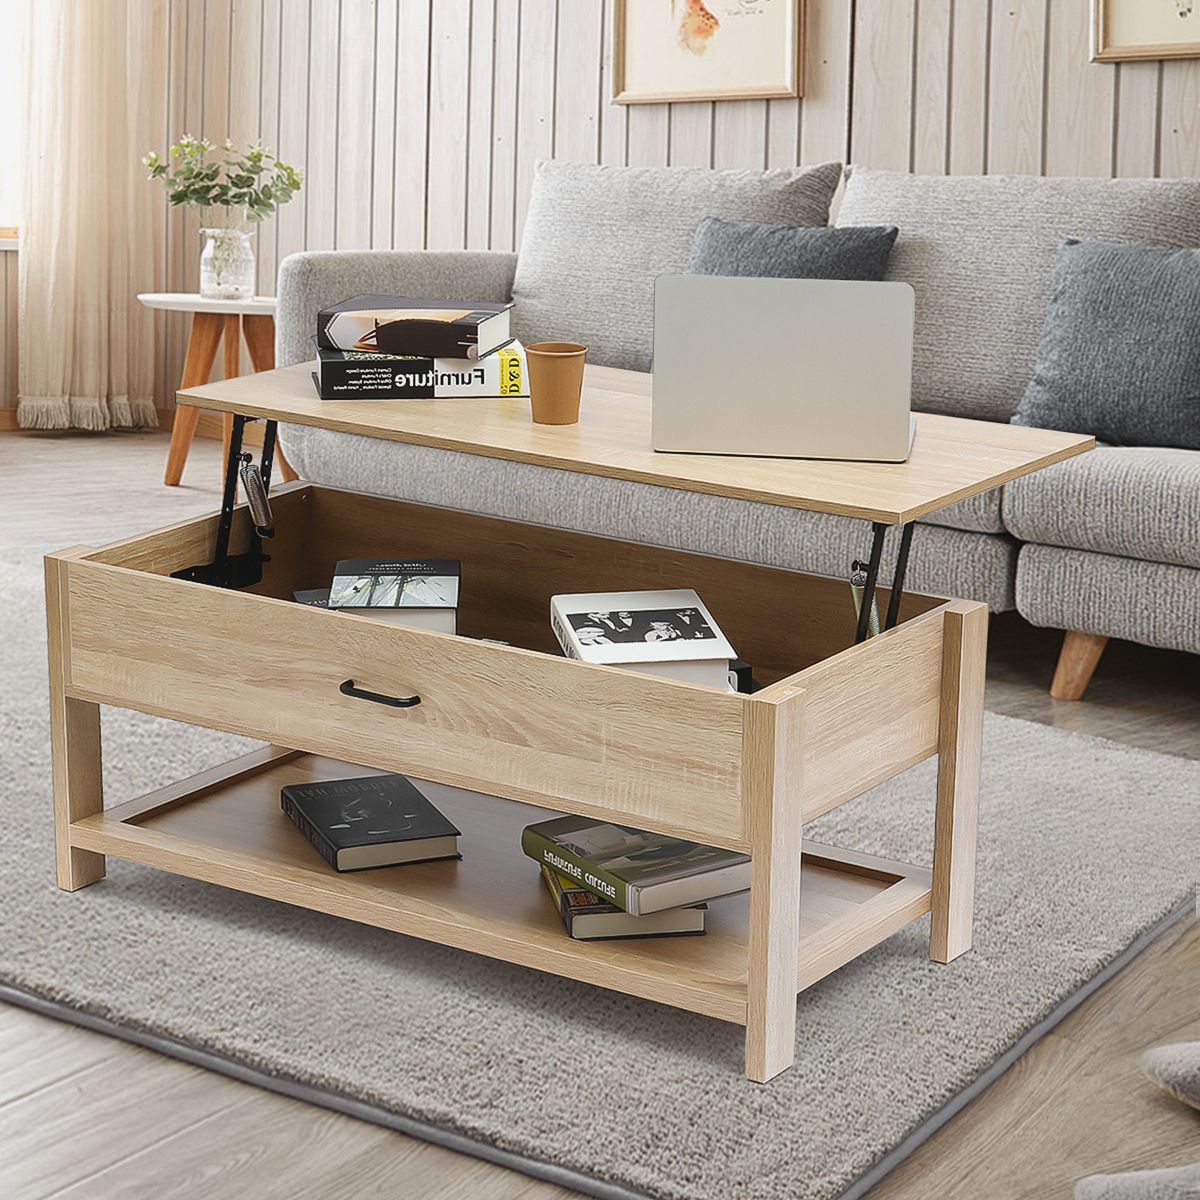 Latest 3 Piece Shelf Coffee Tables Within Nordic Style Wooden Lift Top Coffee Table End Tea Tables With Hidden (View 5 of 10)